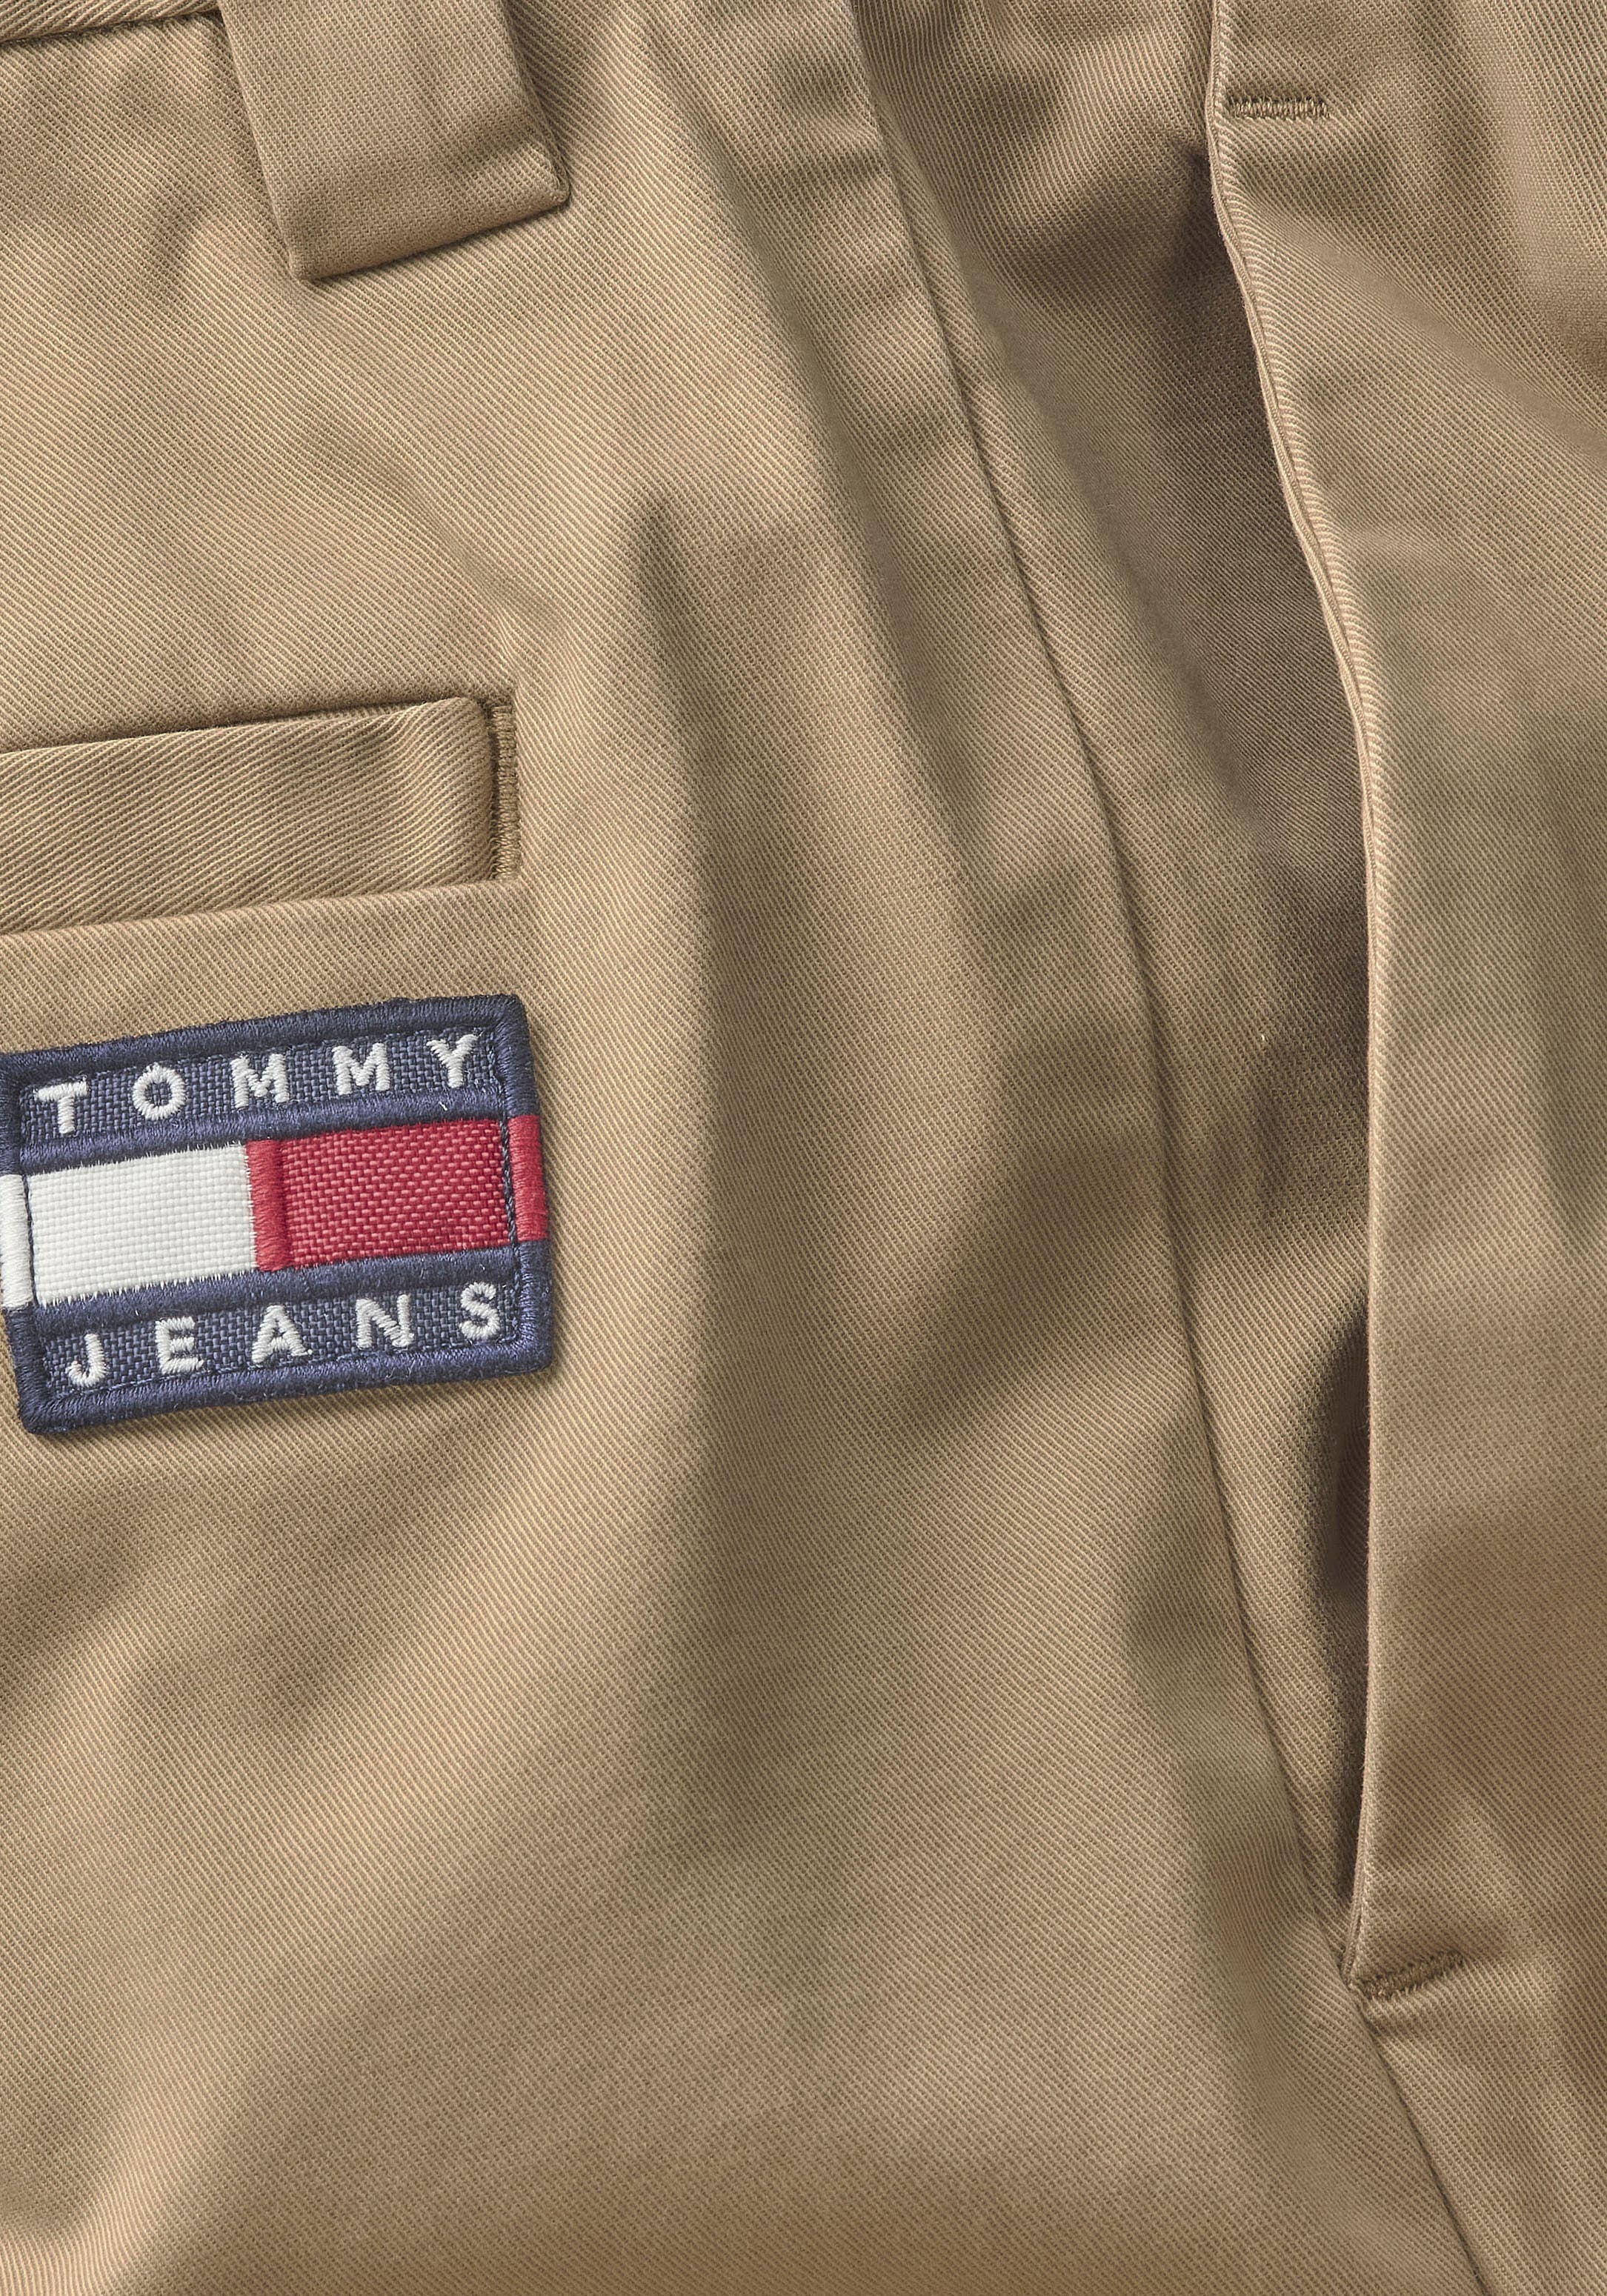 mit Chinohose online CHINO«, bei shoppen Label-Badge Jeans OTTO Tommy DAD »TJM